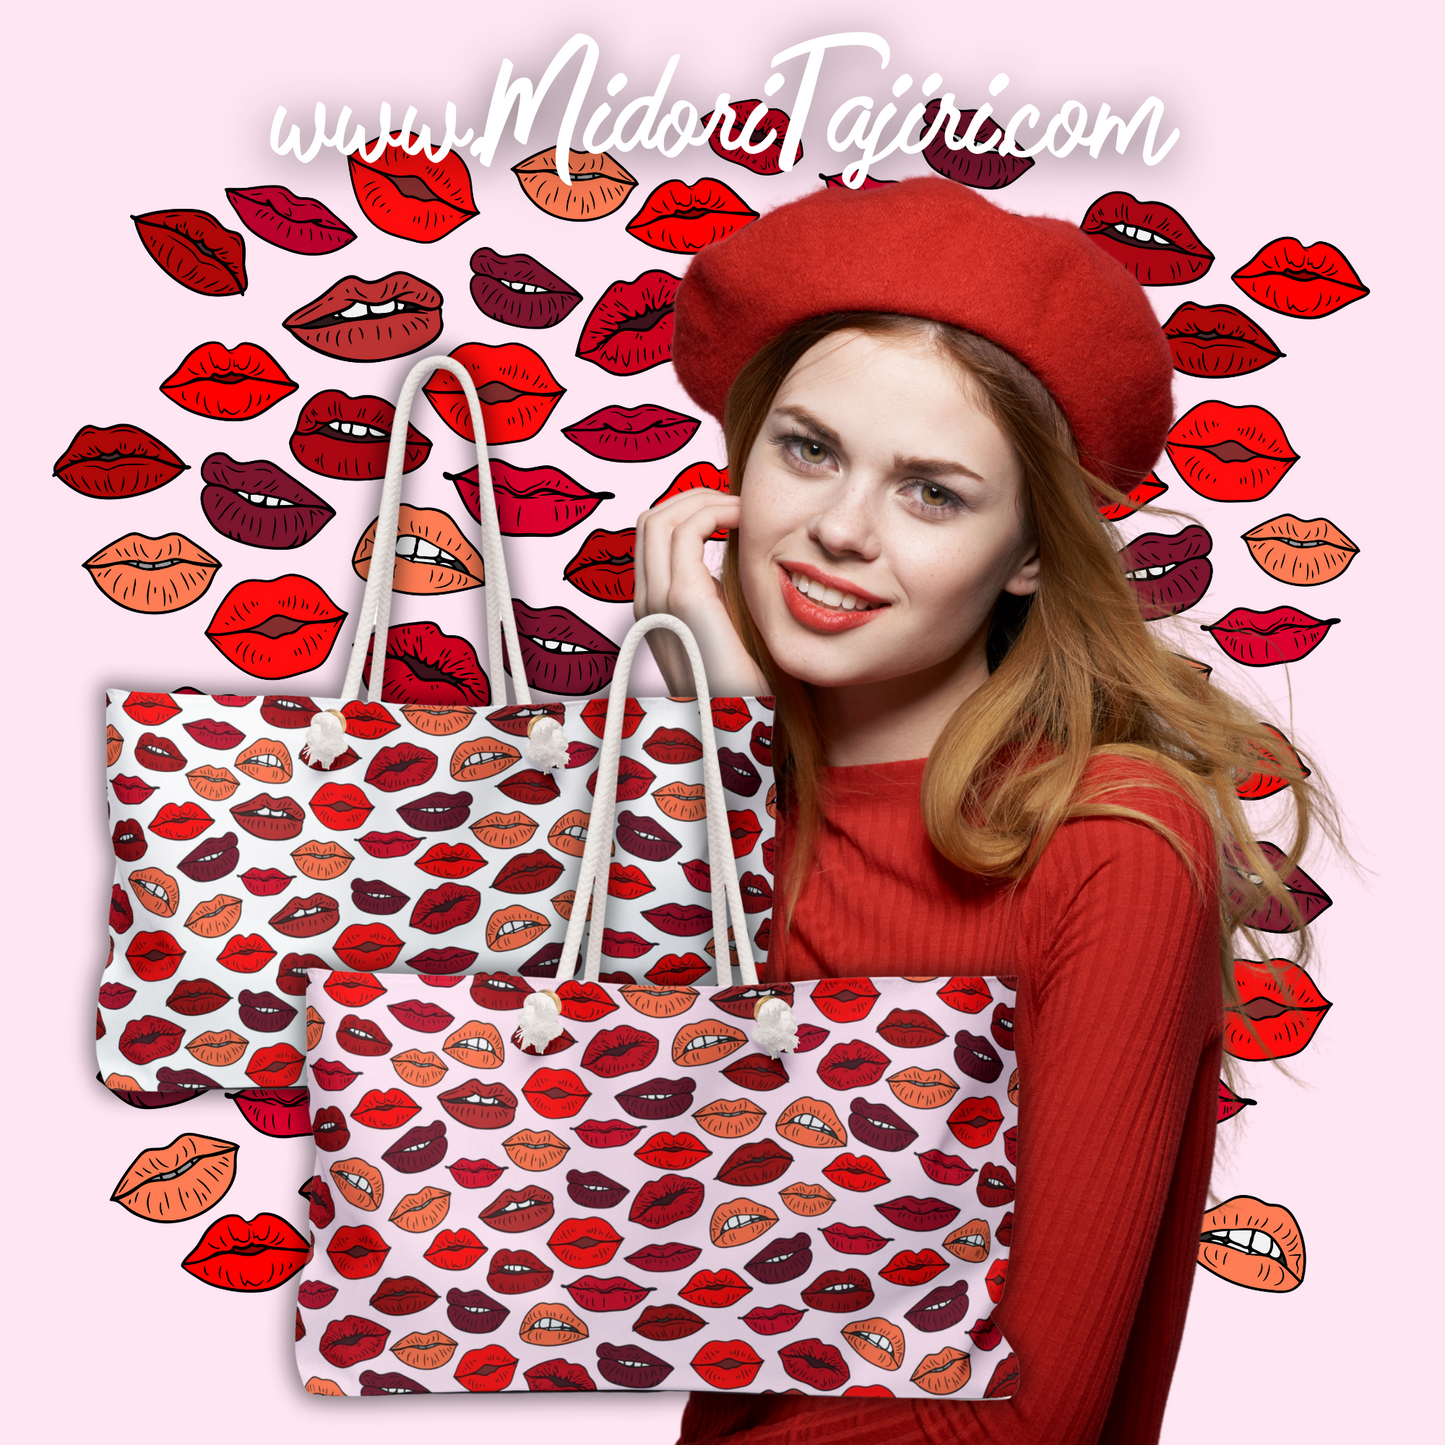 Retro Pink and Red Kisses Weekender Tote, Holiday Valentine Kiss Lips Book Brush Swag Bag, MUA Freelance Makeup Artist Cosmetics Gift Bag